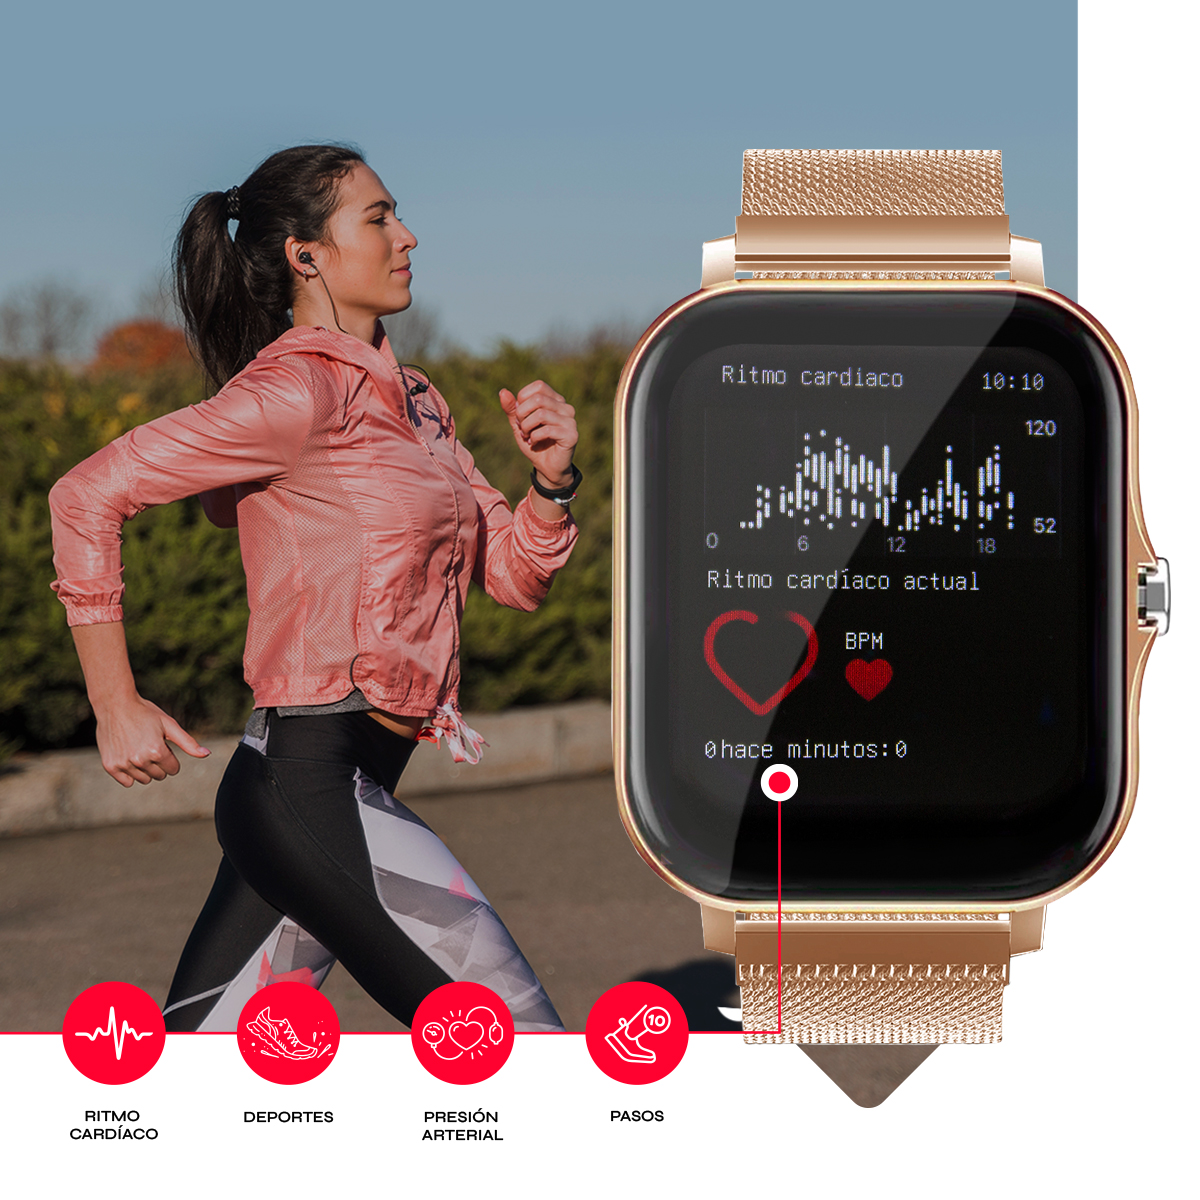 Smartwatch Mujer Ariestar para Android iphone oro rosa